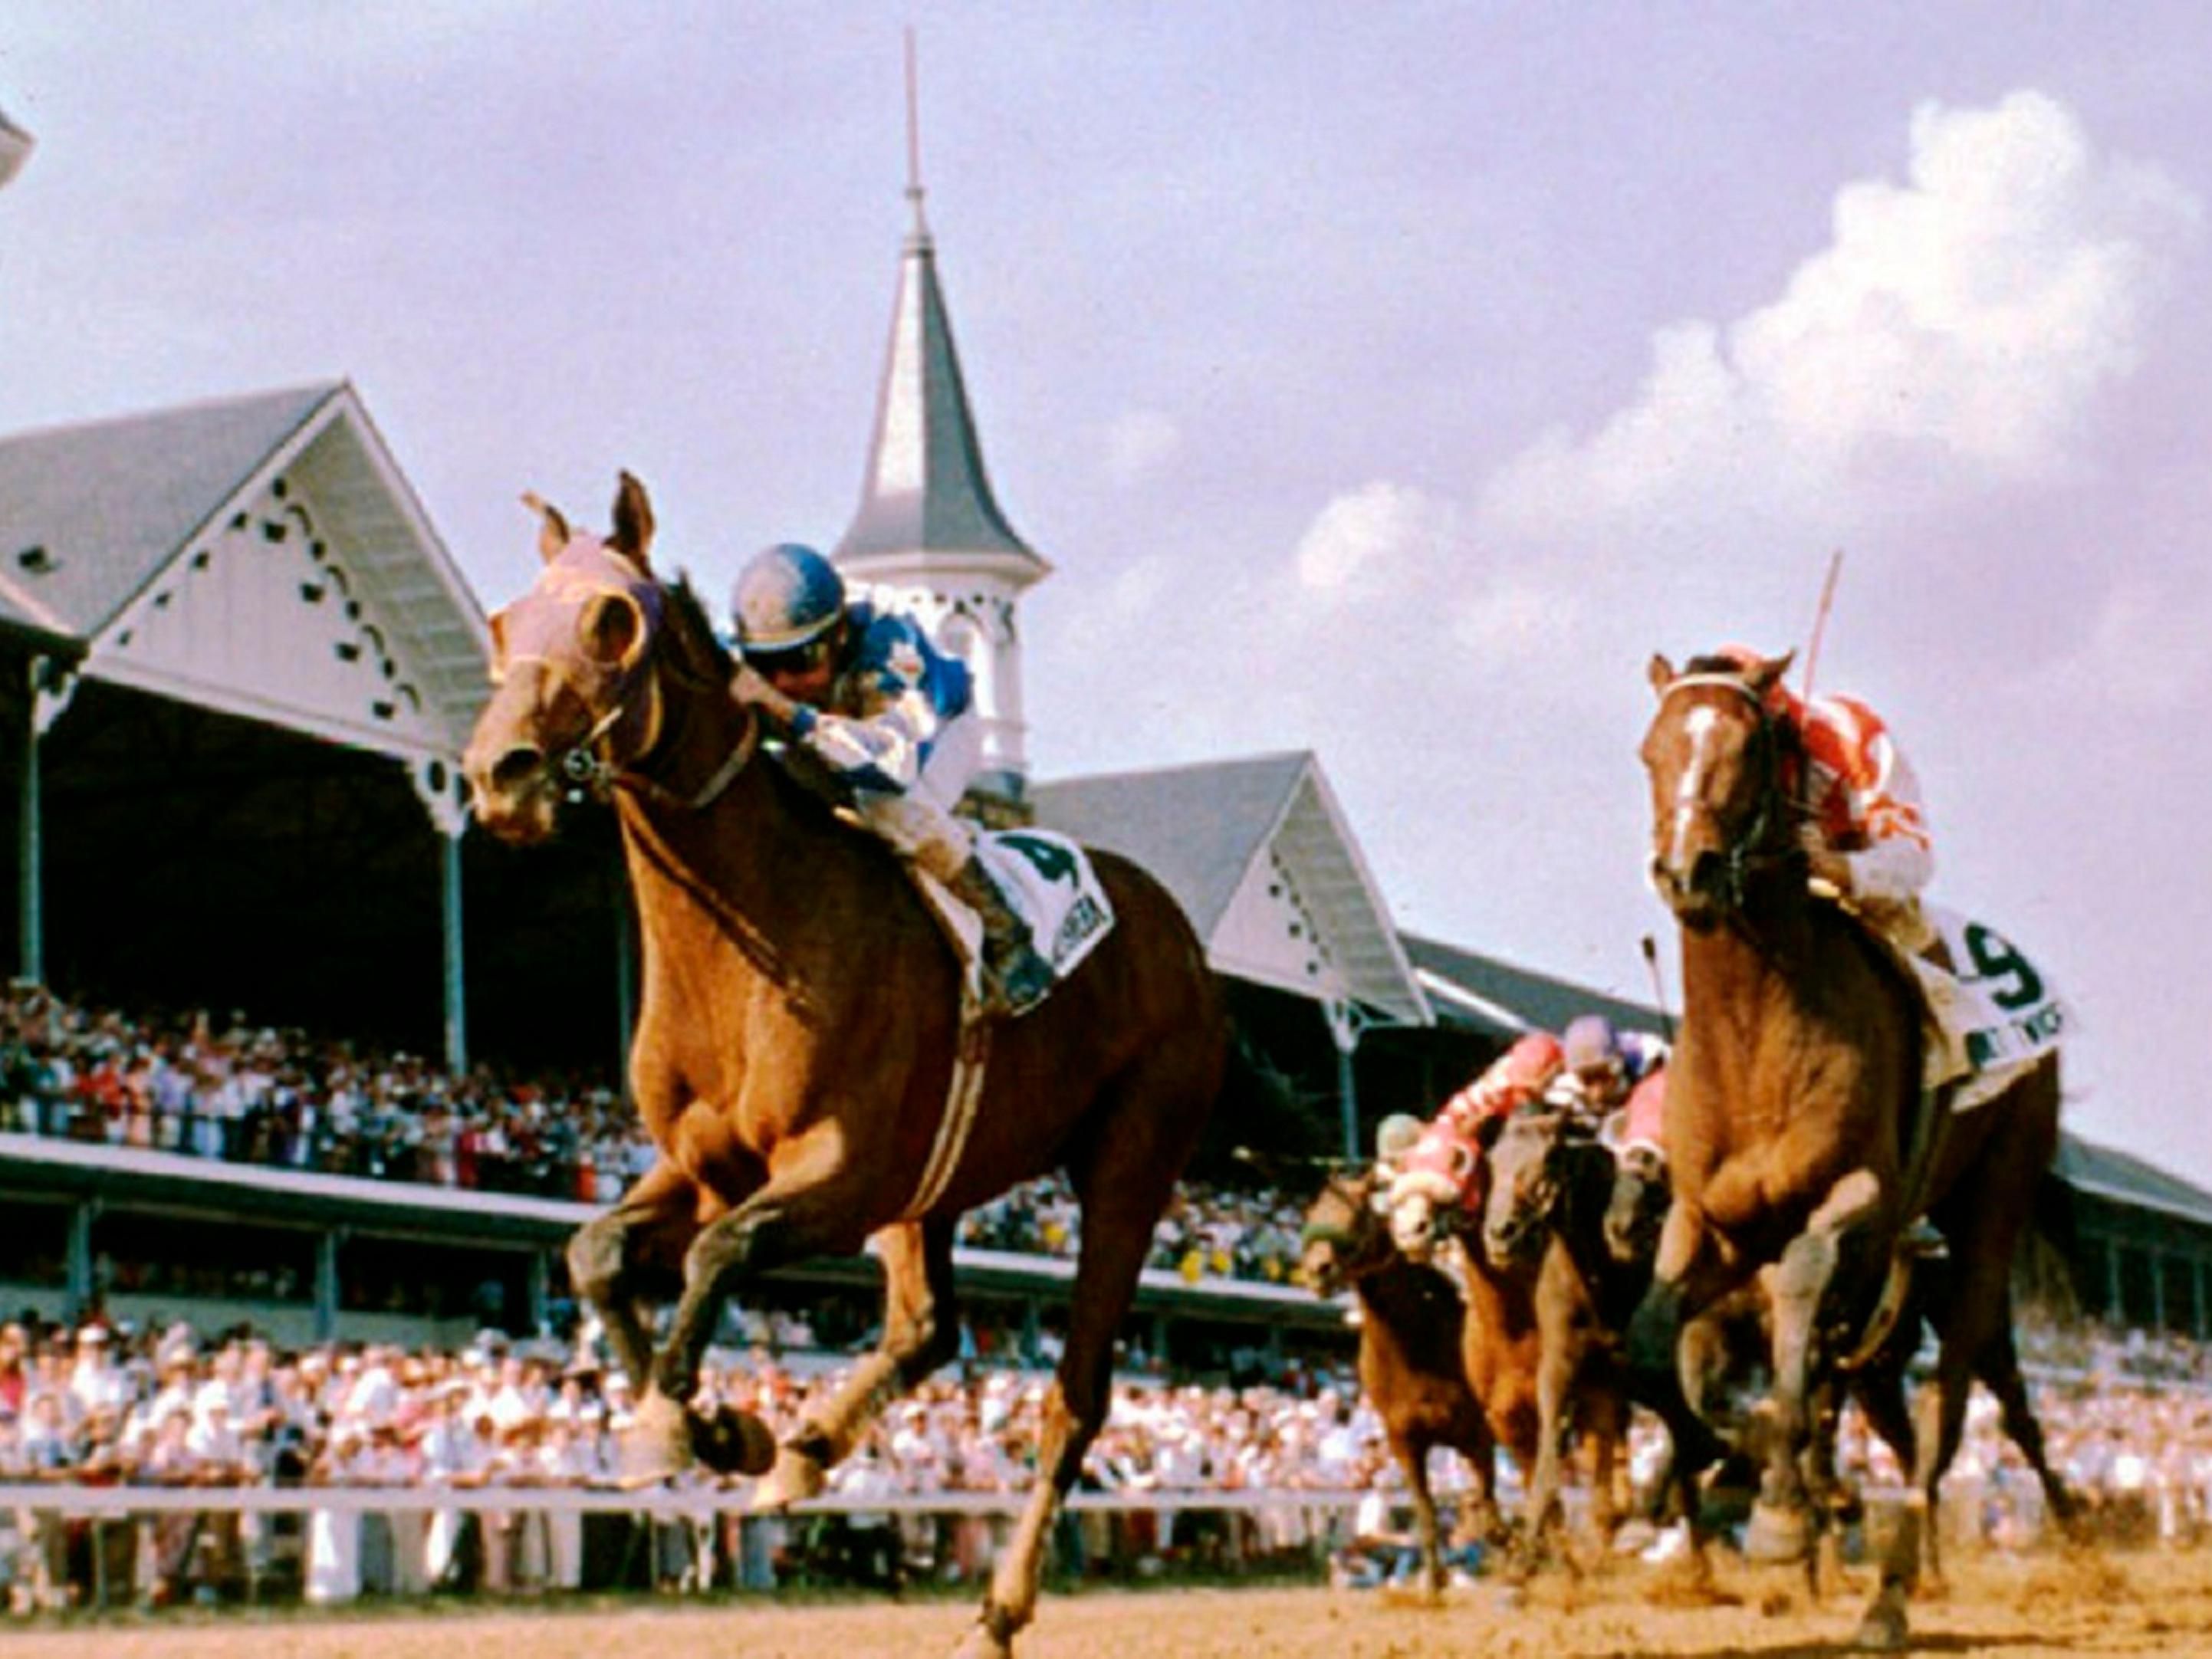 Stay with us for Kentucky Derby 150